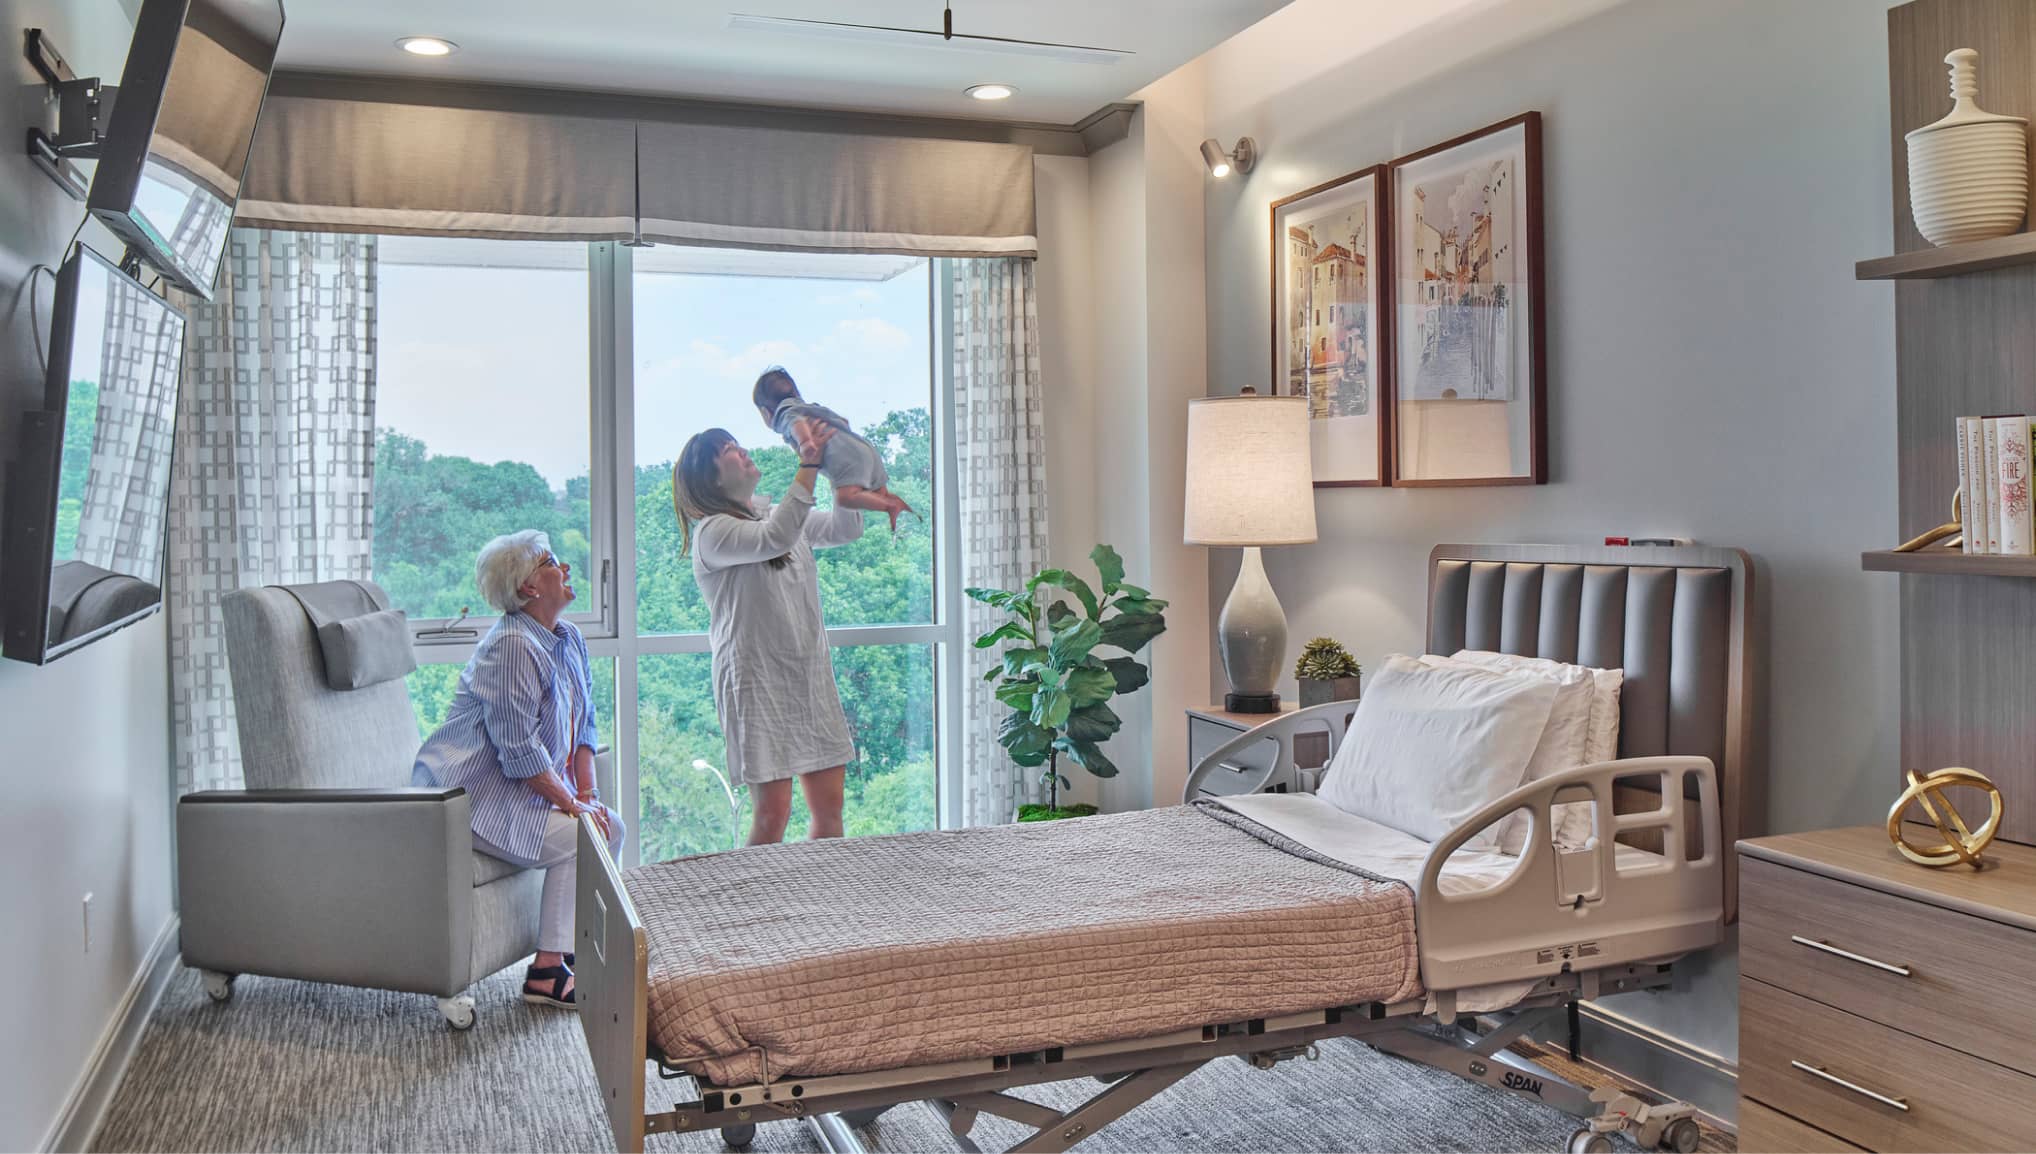 Personalized living spaces like this skilled nursing suite at Dallas' Vista at CC Young help seniors who require a higher level of care feel comfortable and connected.